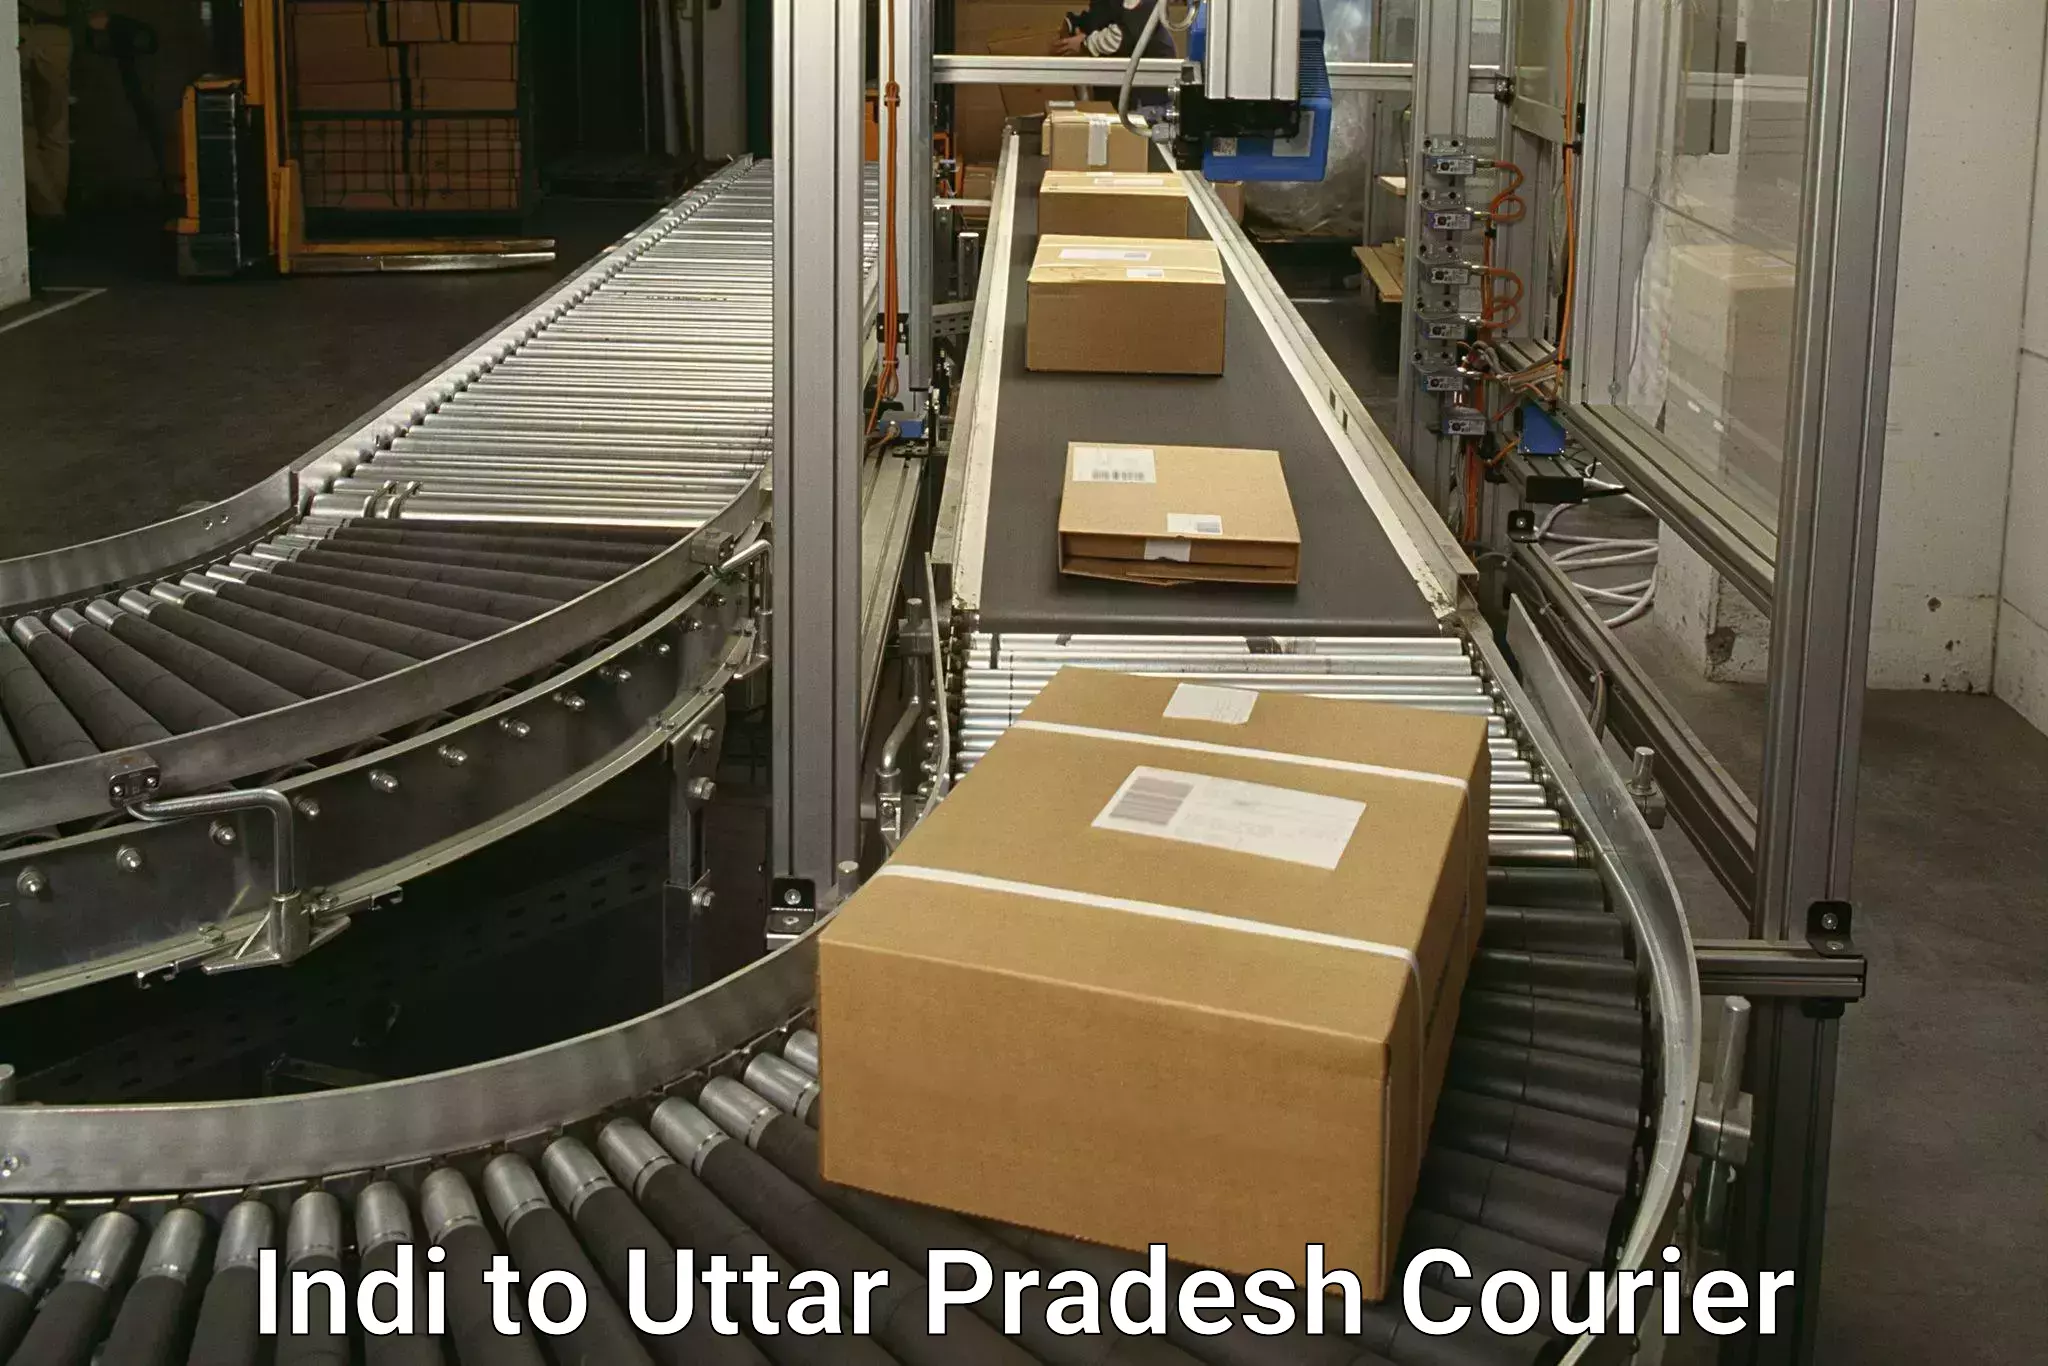 Urgent courier needs Indi to Allahabad